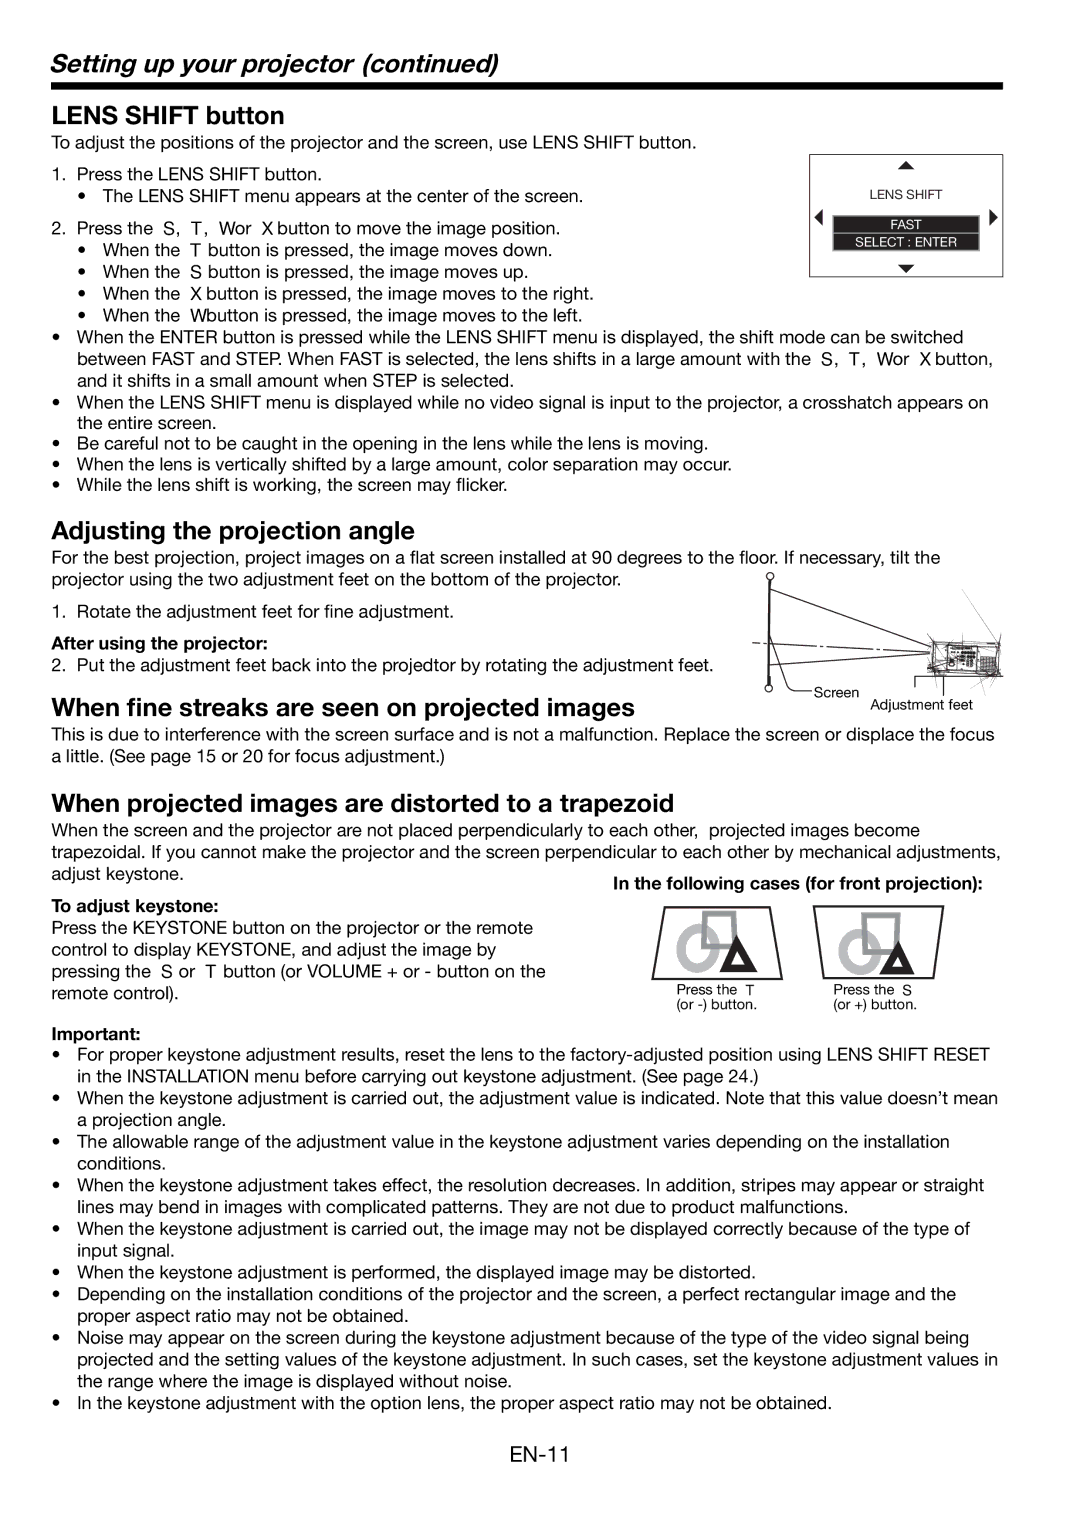 Mitsubishi Electronics FL7000 user manual Setting up your projector, Lens Shift button, Adjusting the projection angle 